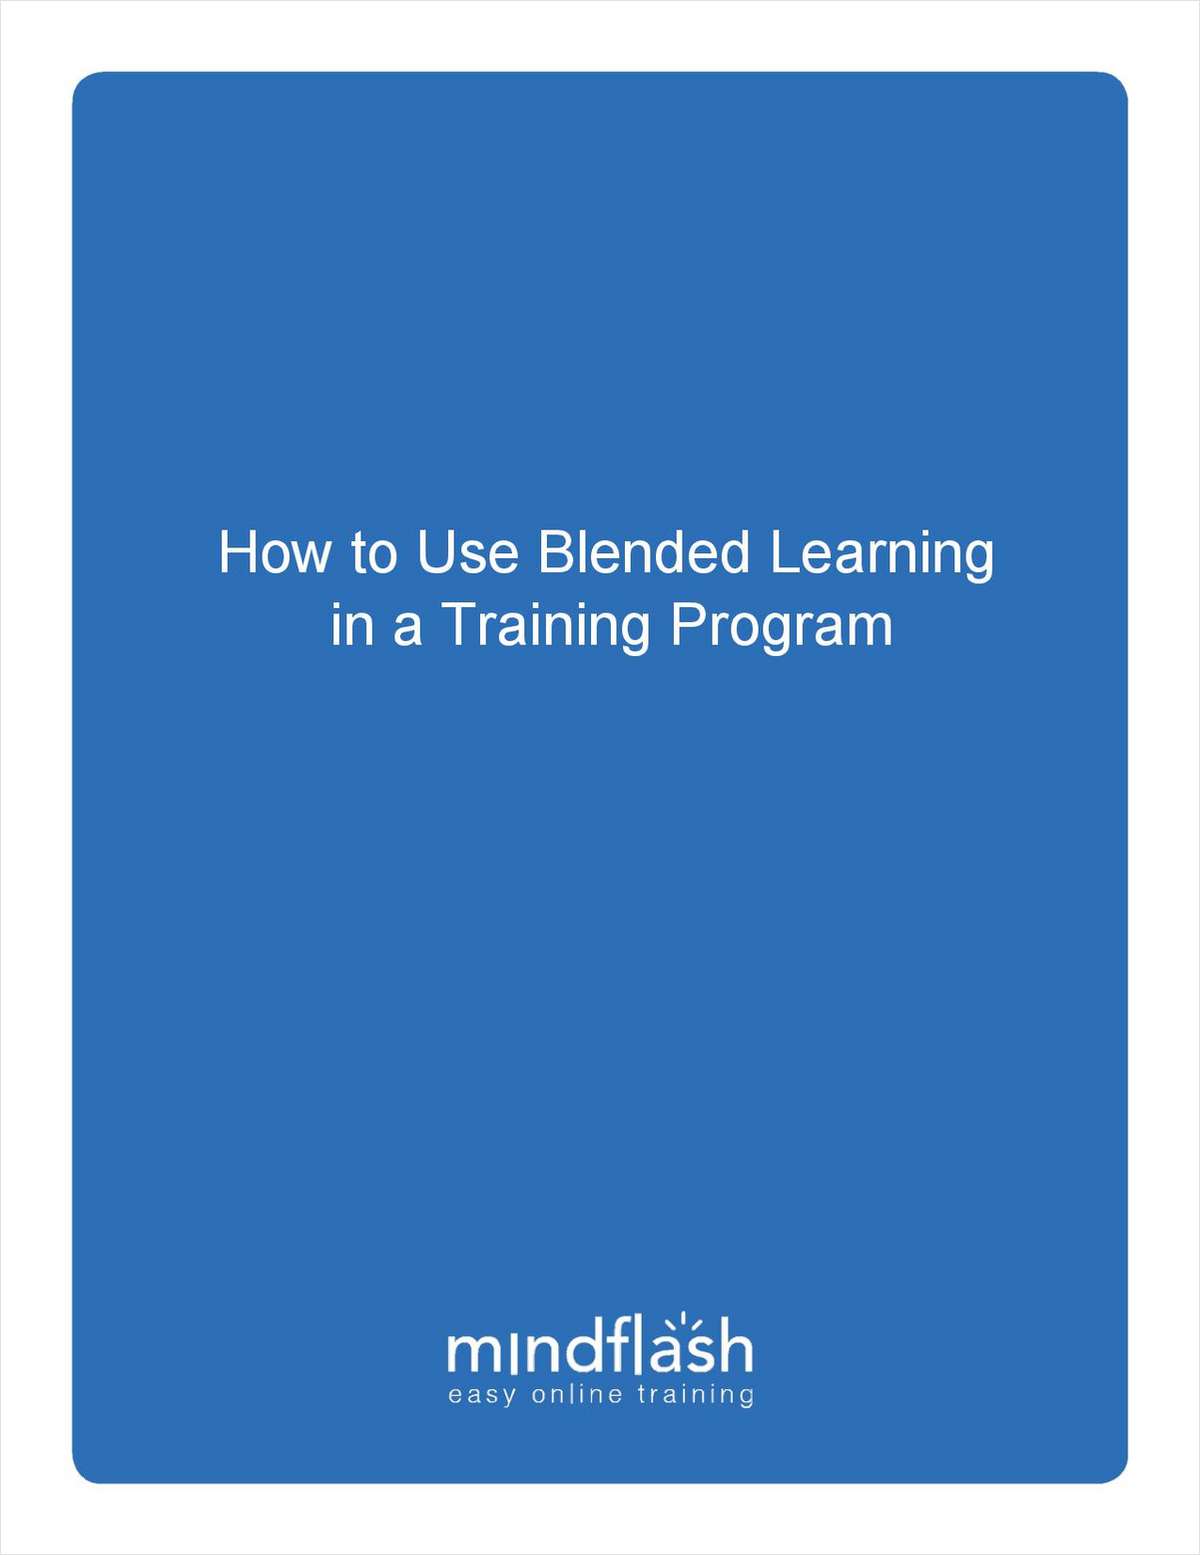 How to Use Blended Learning in a Training Program